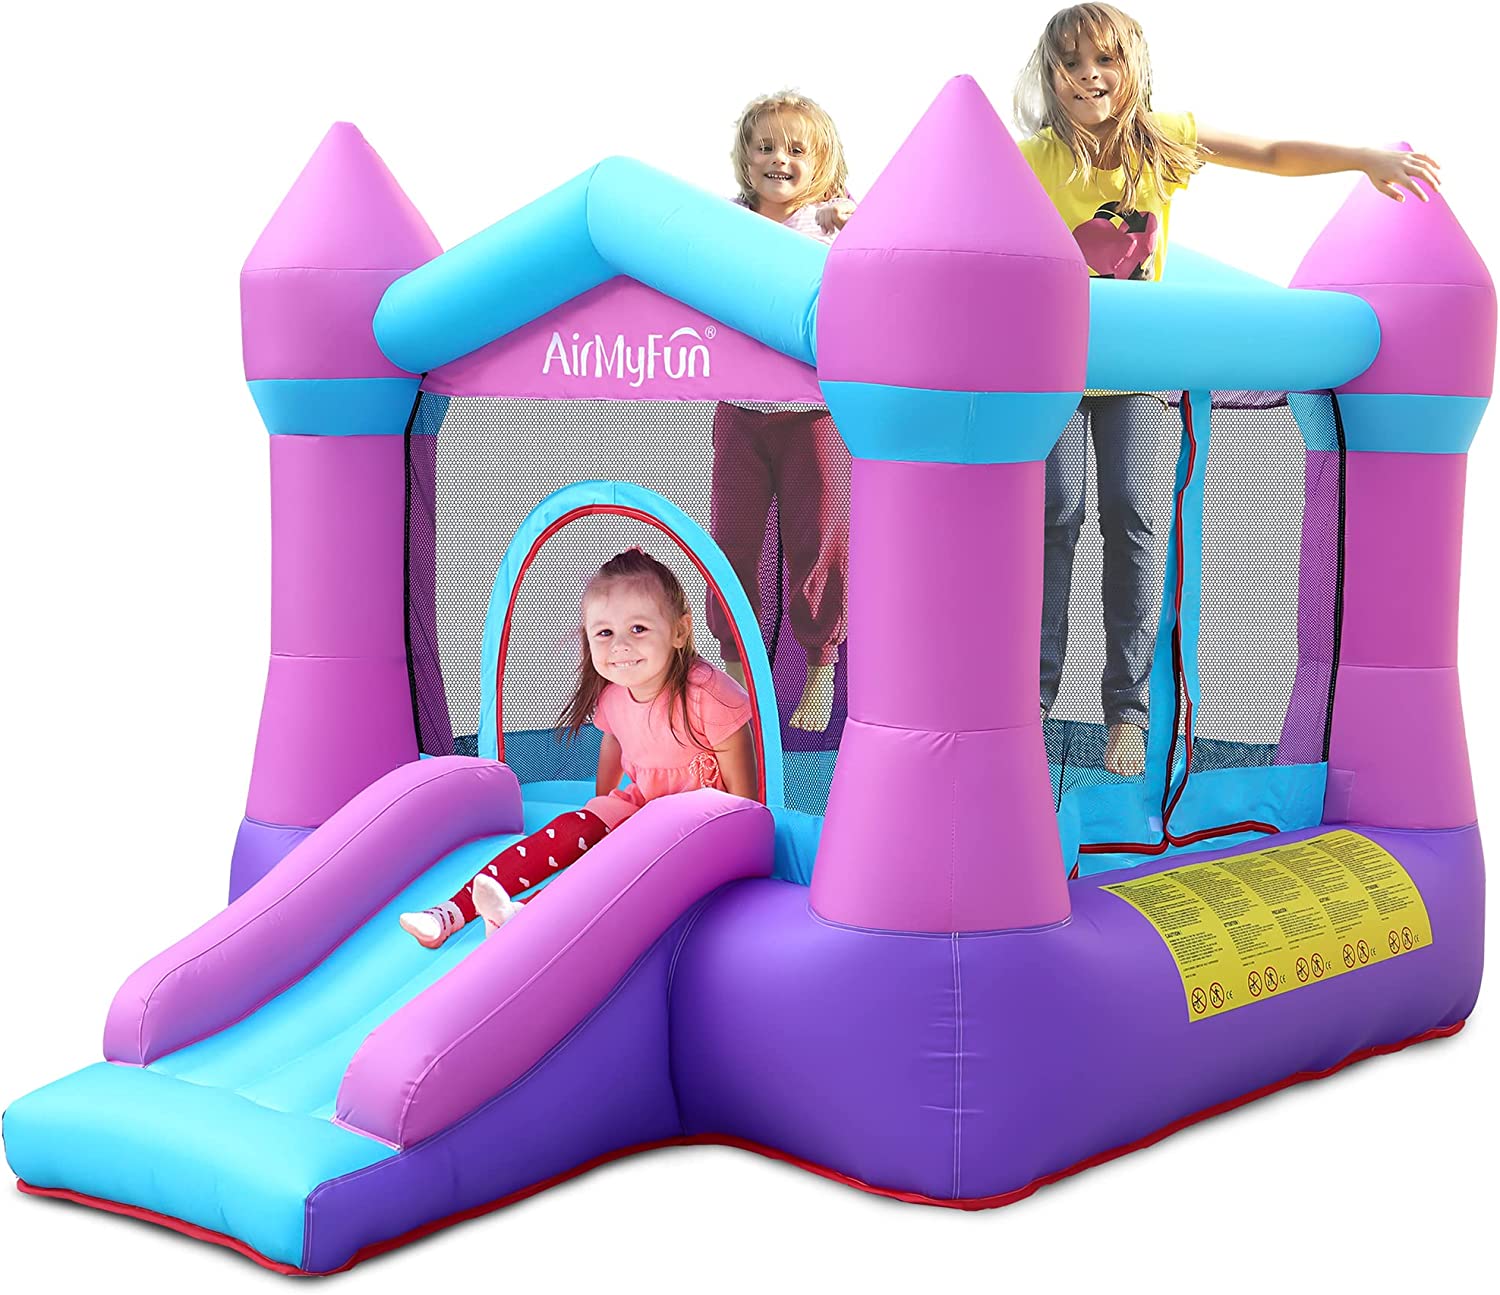 Inflatable　with　Indoor/Outdoor　Bouncer　Pink　Kids　with　Sewn　Double　House　Jumping　Bounce　with　Bouncy　Slide,　House　Castle　Blower,　AirMyFun　Beams